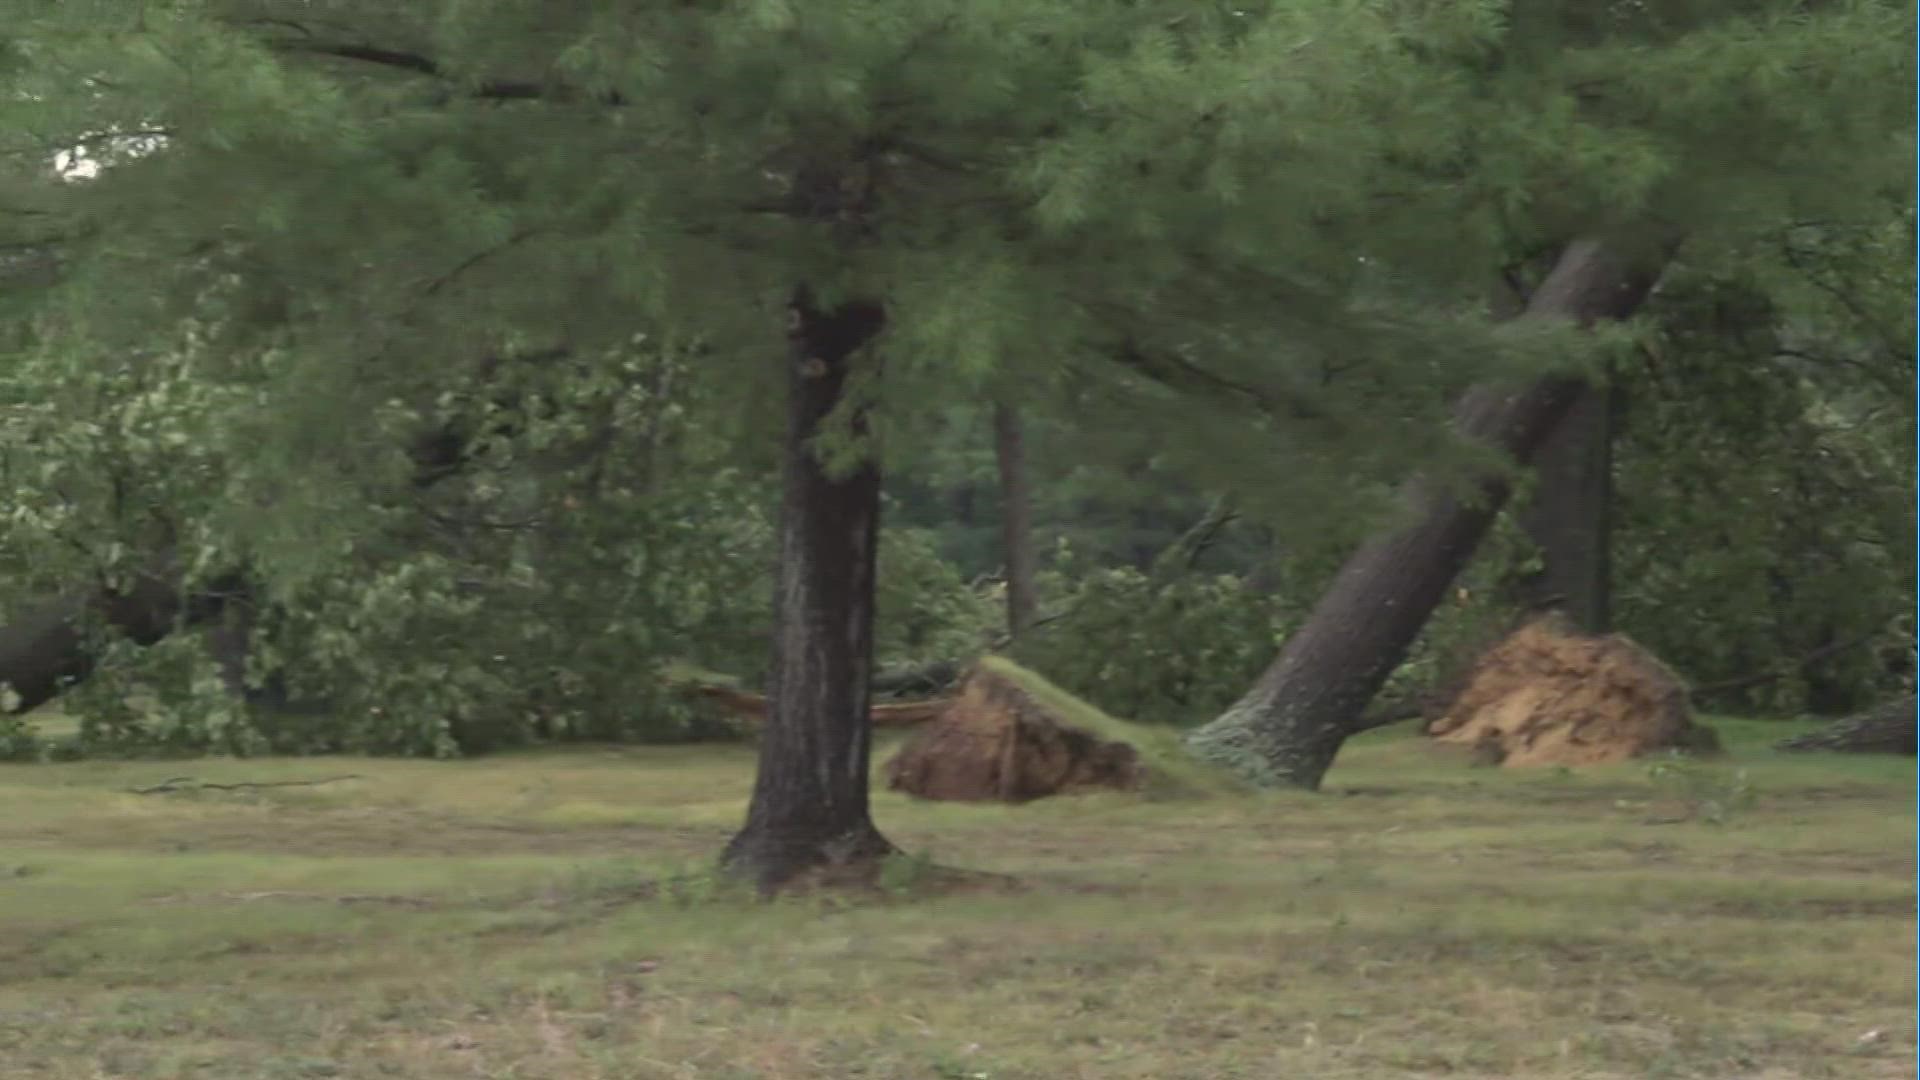 Severe storms crashed through Muskegon Tuesday afternoon, downing trees, powerlines and uprooting trees.